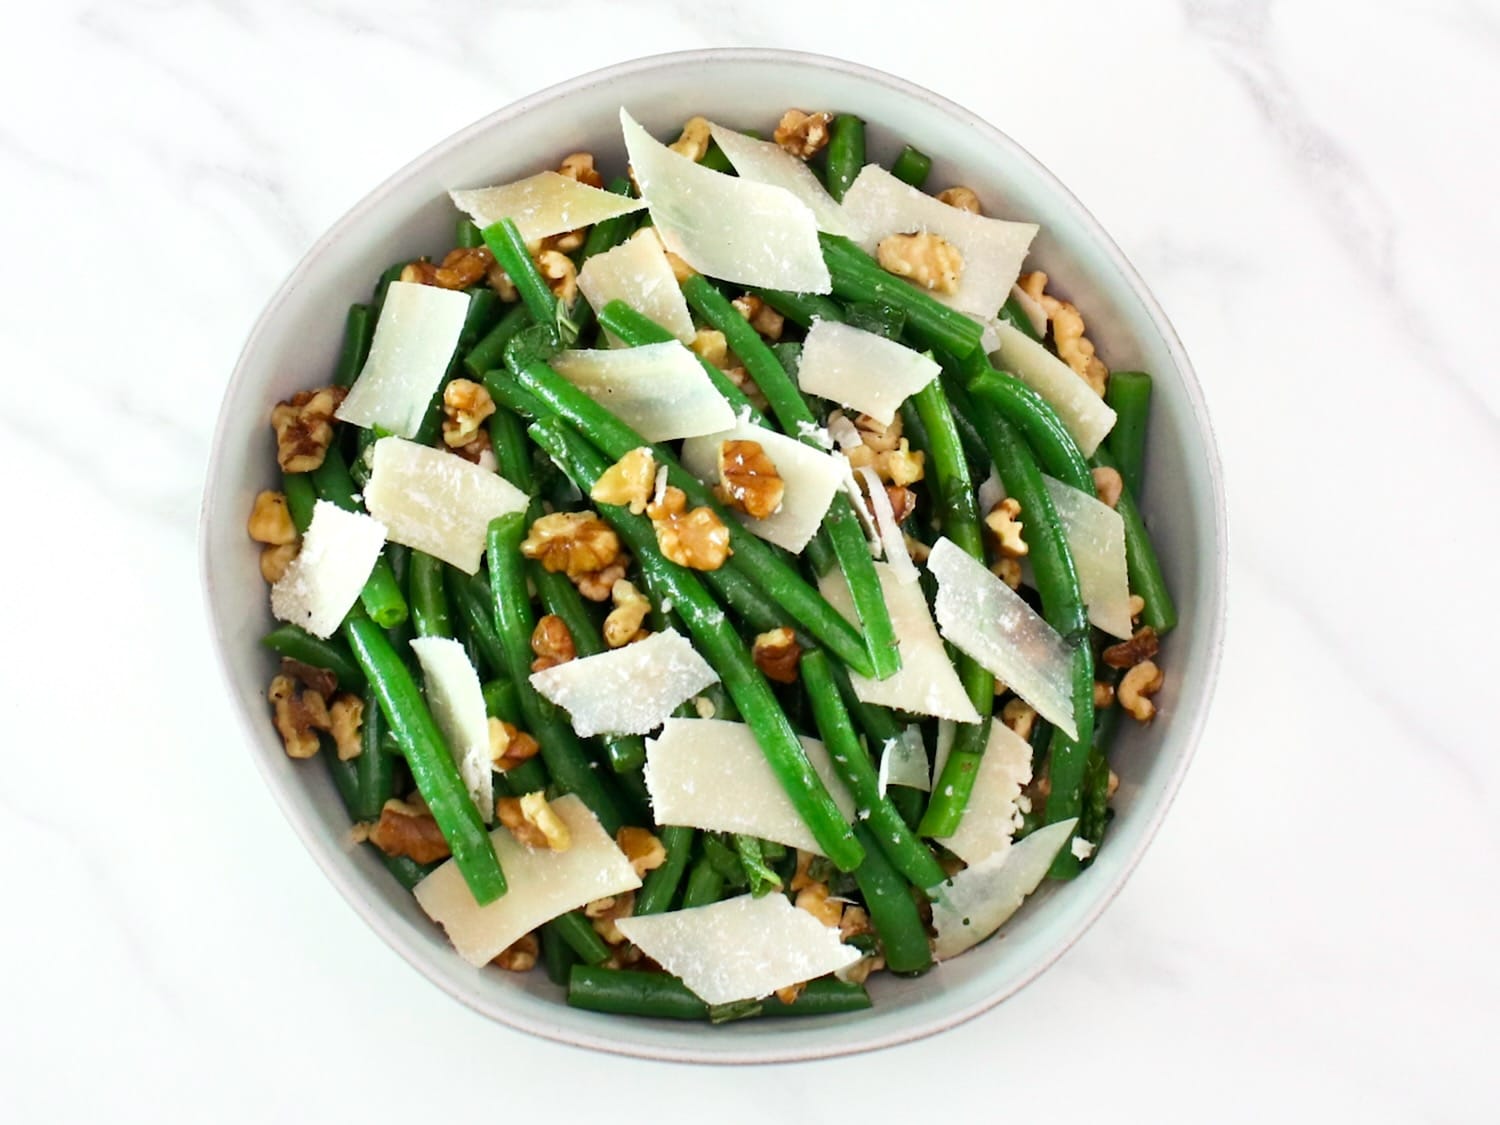 Green bean salad with walnuts and parmesan as garnish on a white bowl.